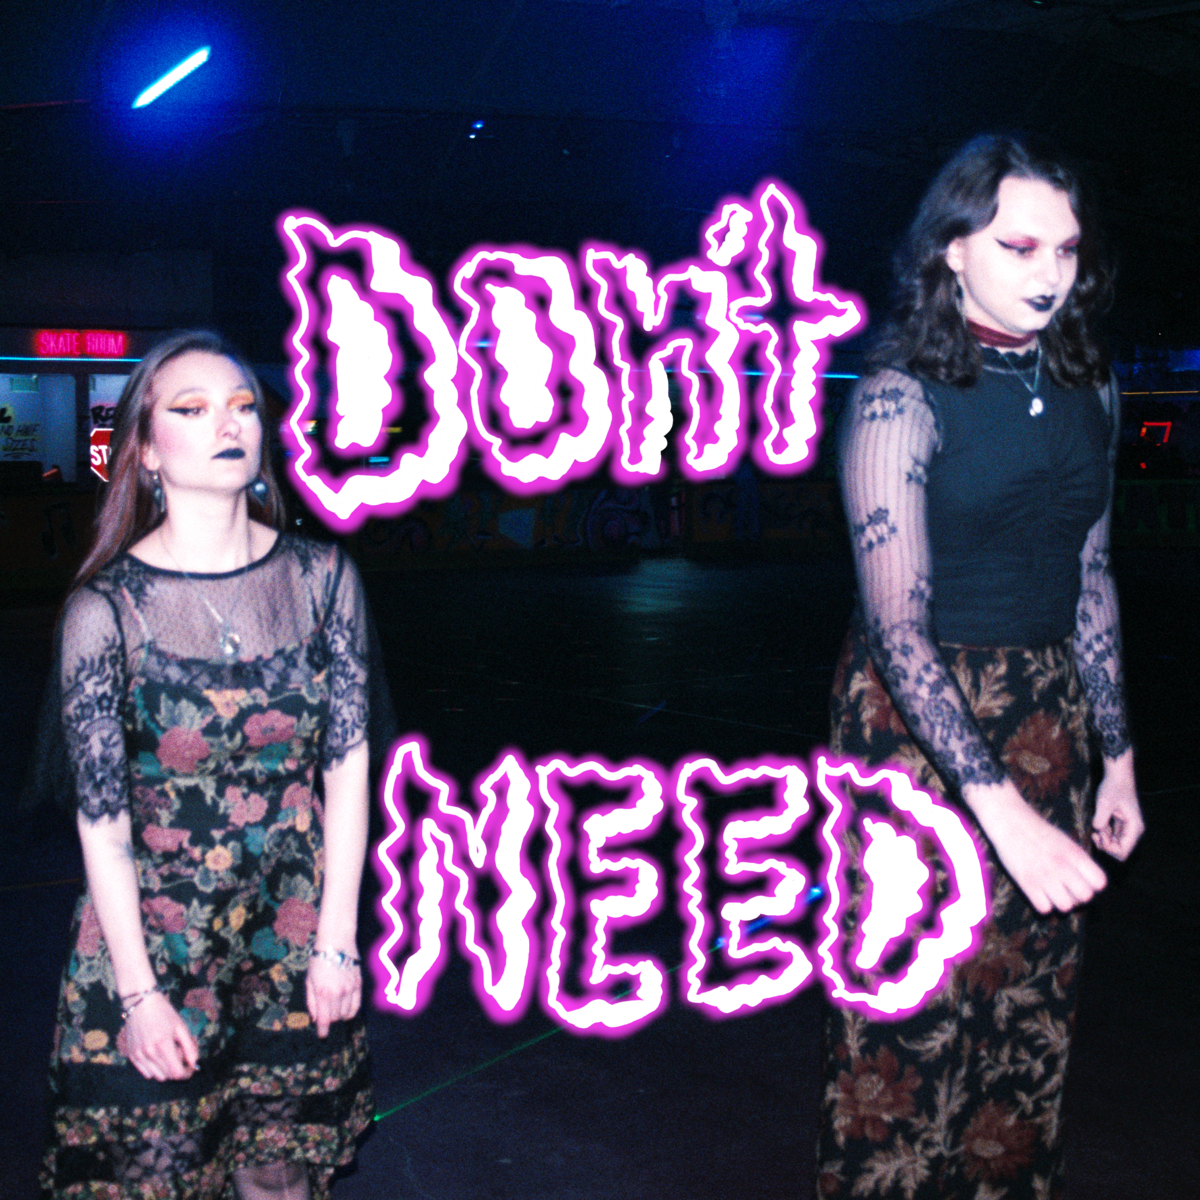 The cover art for the new single by Witch Weather, "Don't Need."